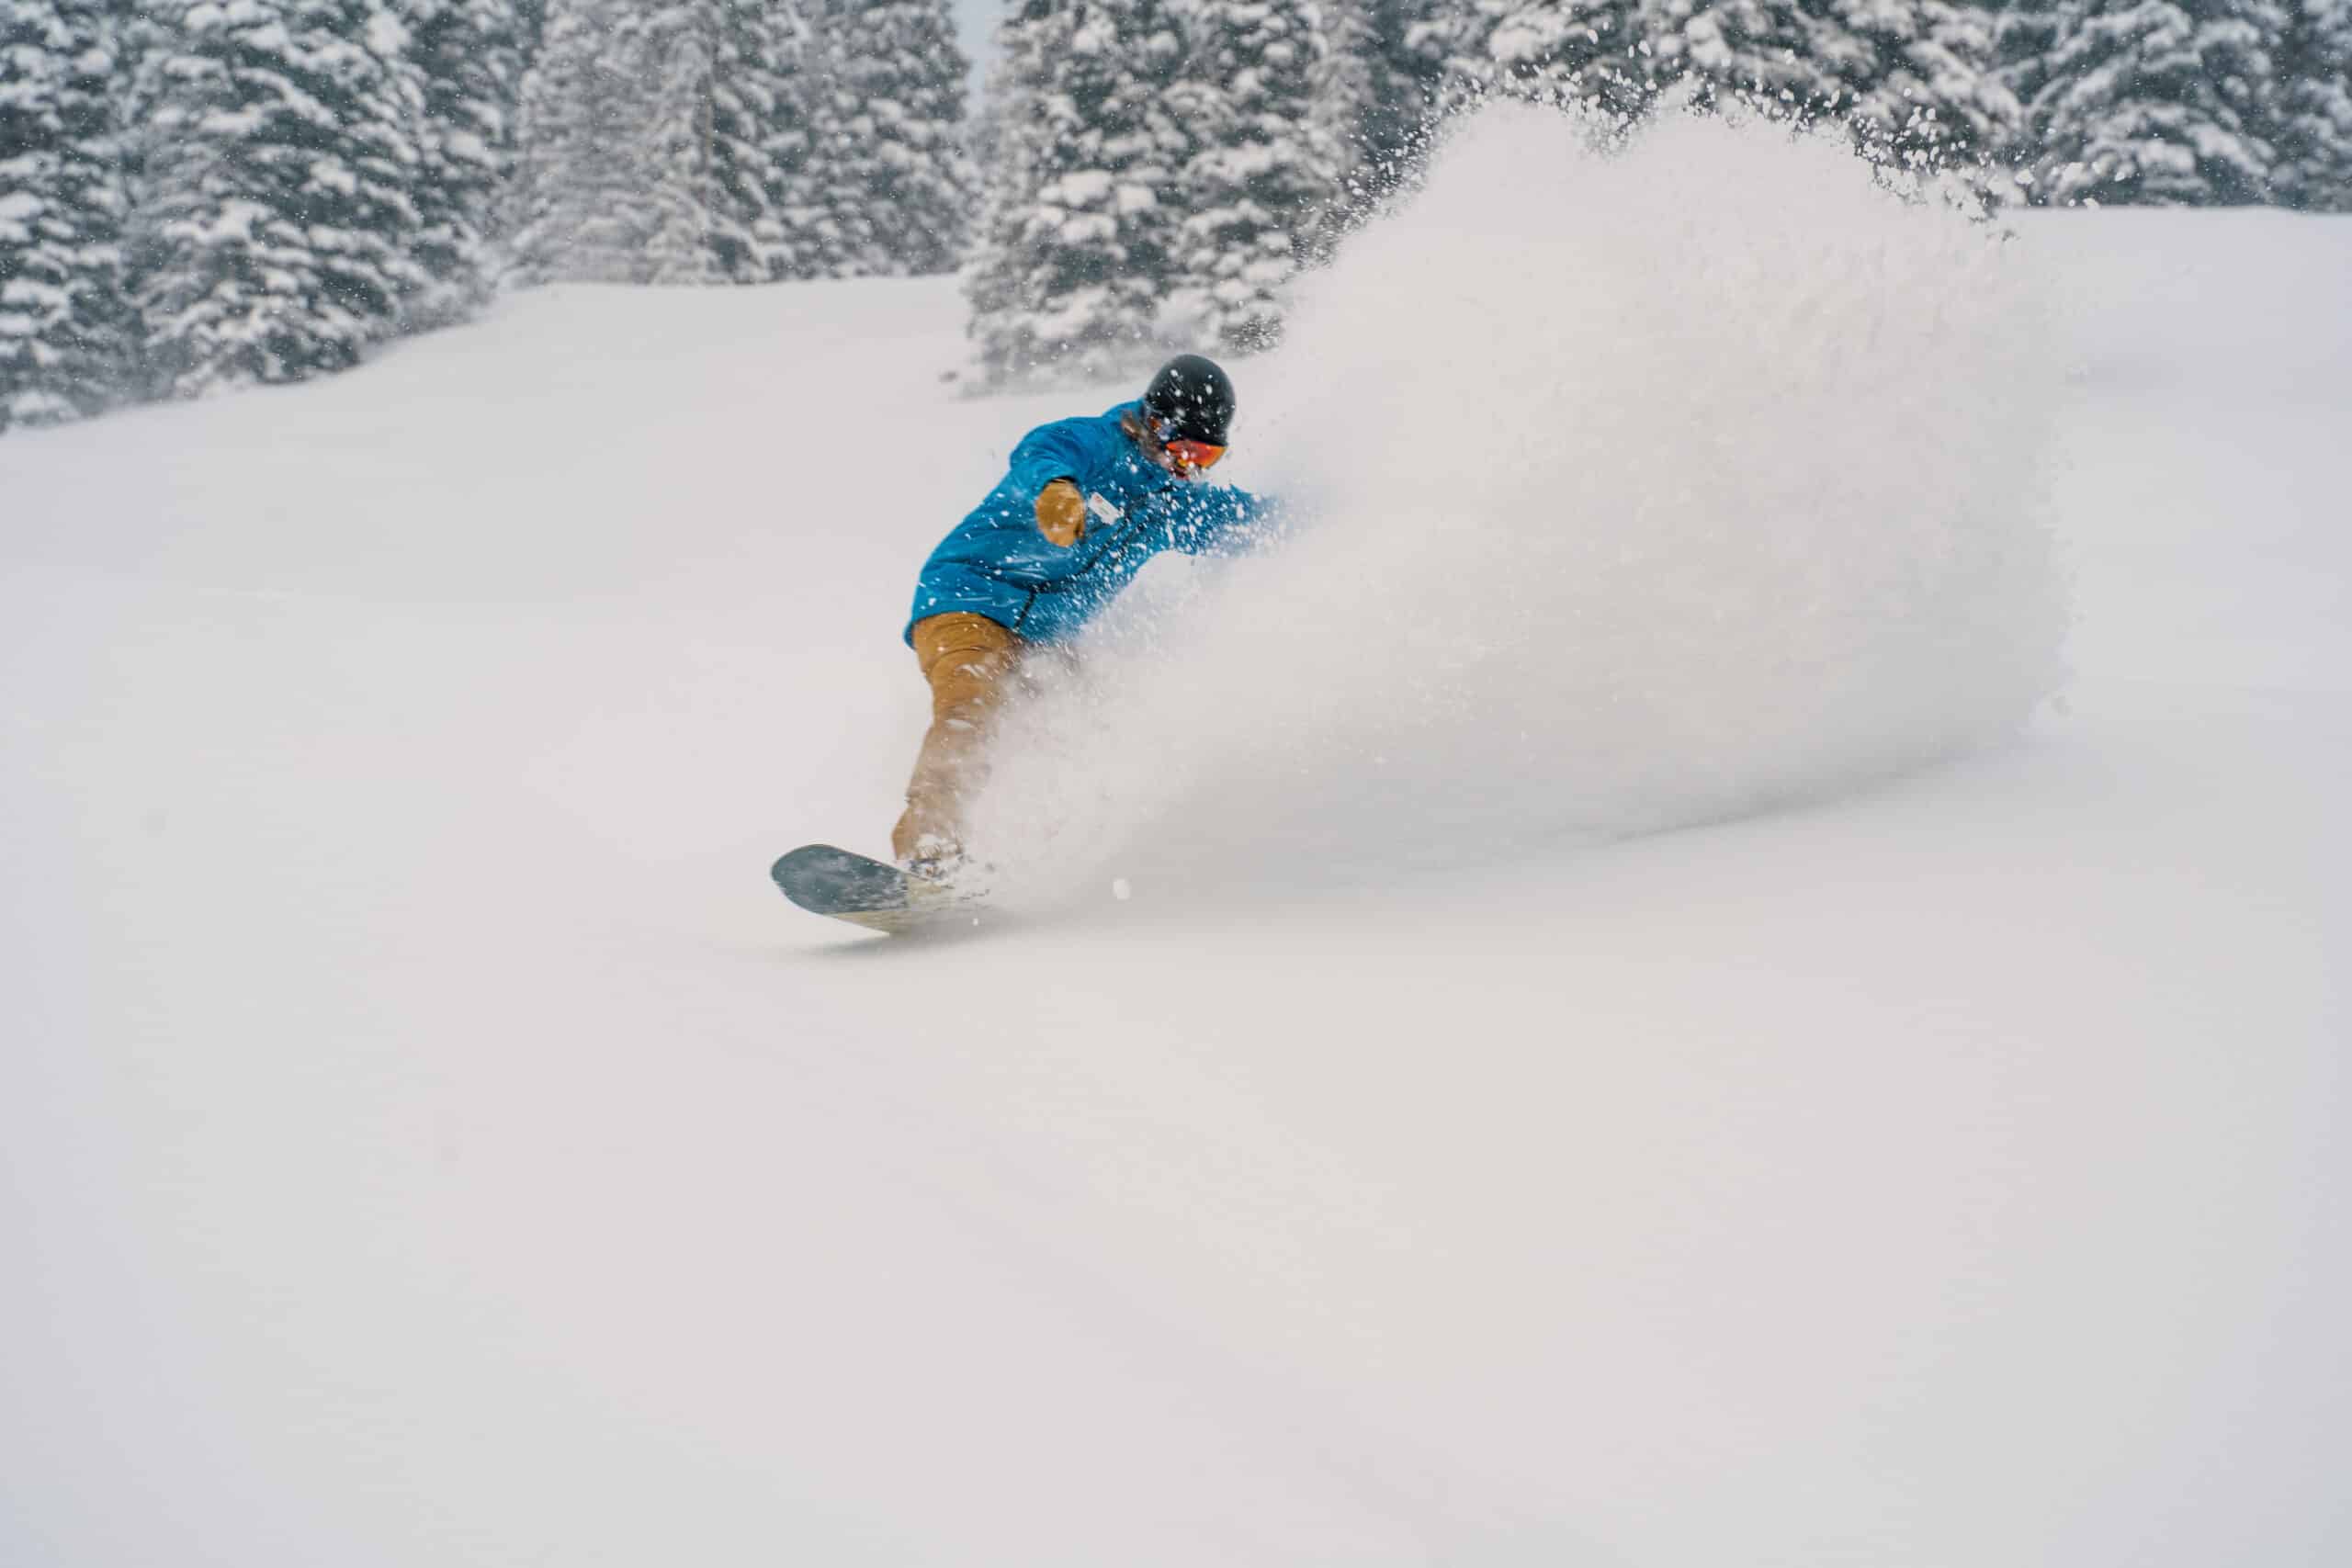 Snowboarder slashes powder up during a carve